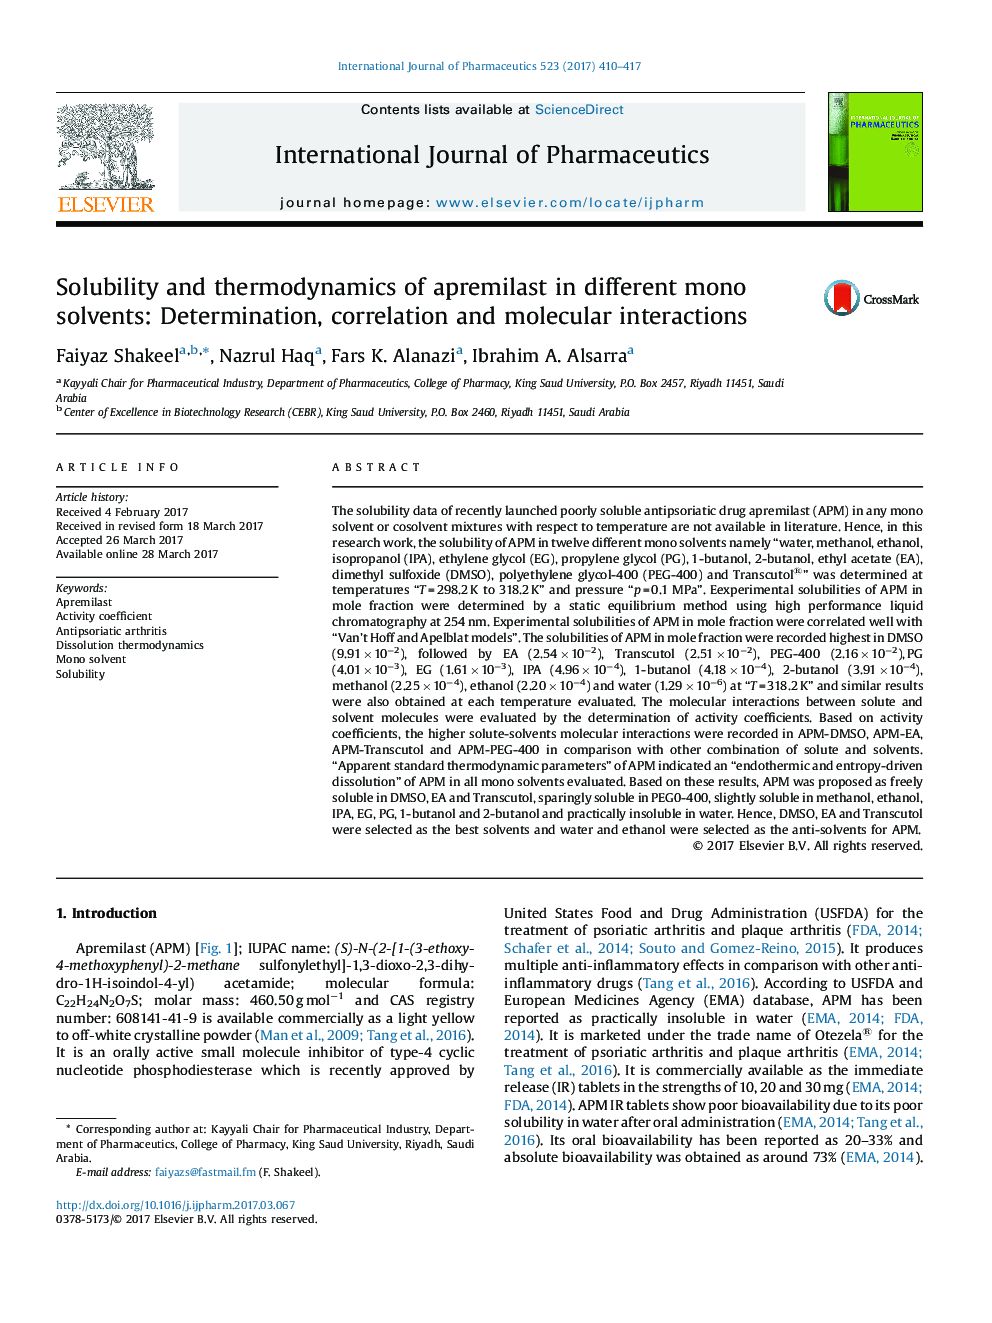 Solubility and thermodynamics of apremilast in different mono solvents: Determination, correlation and molecular interactions